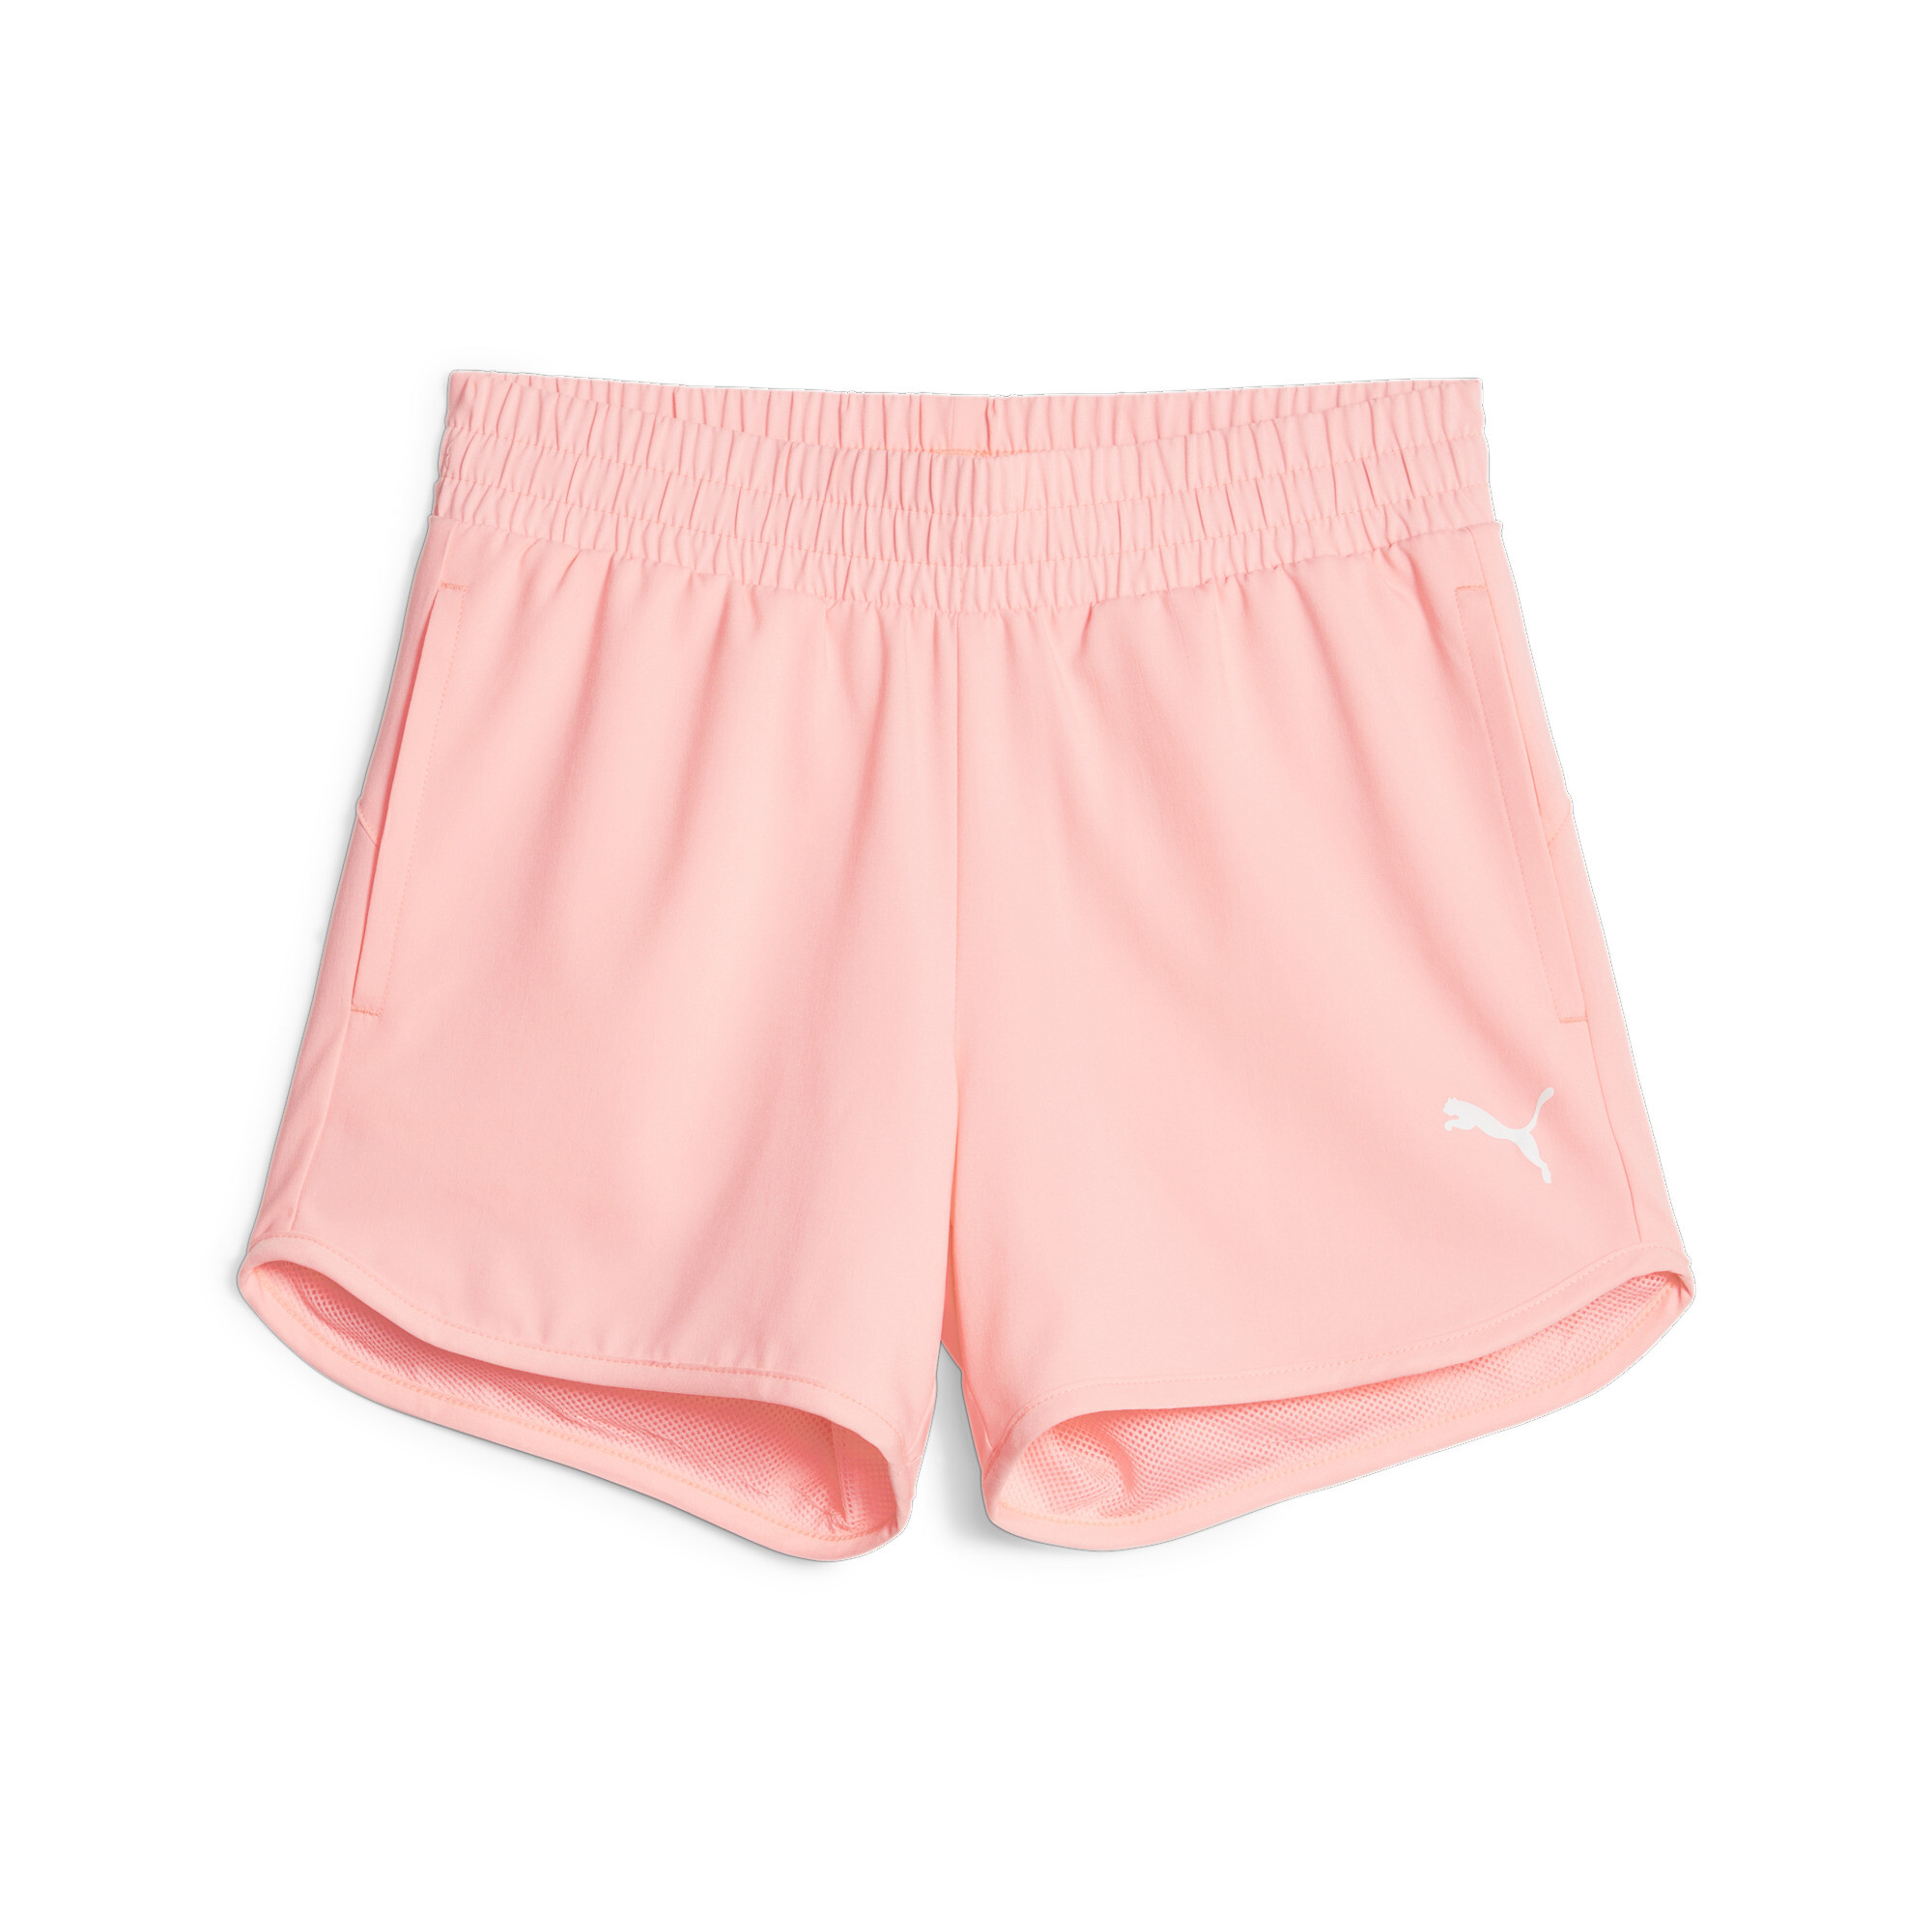 Women's Puma Active Youth Shorts, Pink, Size 5-6Y, Clothing